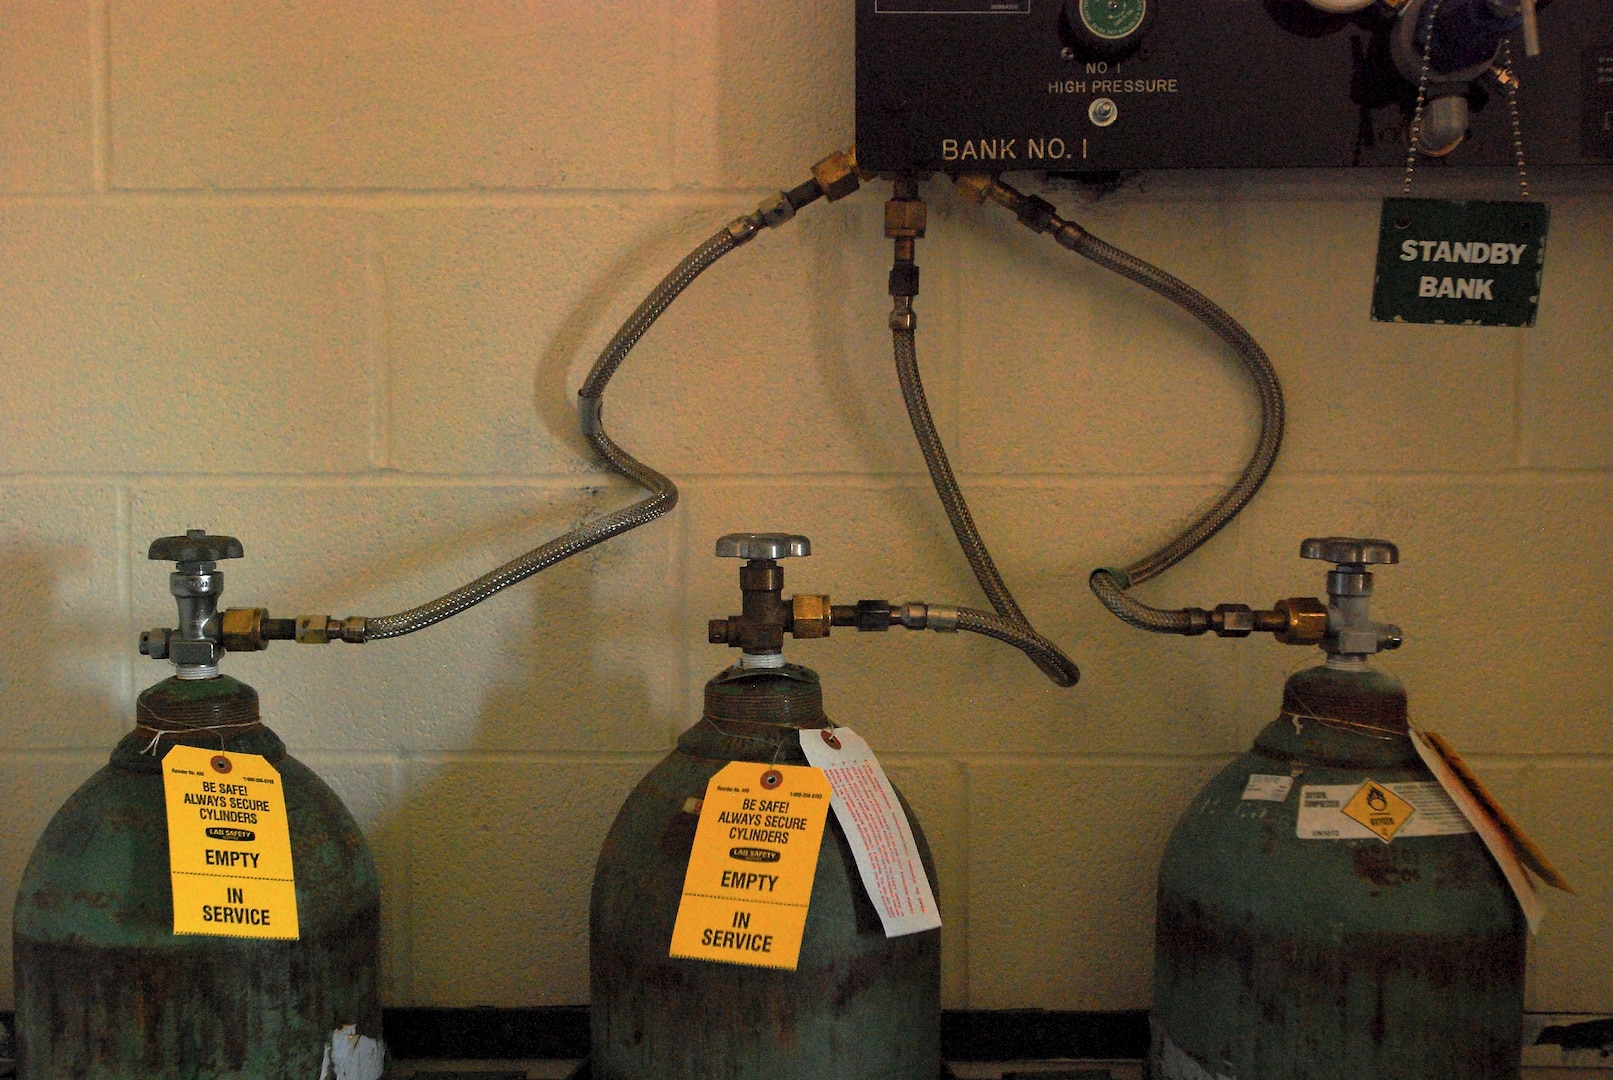 Cylinders containing the oxygen used for breathing during altitude training. The 359th Aeromedical Squadron, Randolph Air Force Base, Texas, uses a hypobaric chamber to train air crew and pilots about the dangers and symptoms of hypoxia, or altitude sickness. Pure oxygen is preferred over the nitrogen-rich air found closer to sea level because of the dangers of breathing nitrogen at abnormally high and low barometric pressure. 
(U. S. Air Force photo/Brian McGloin)